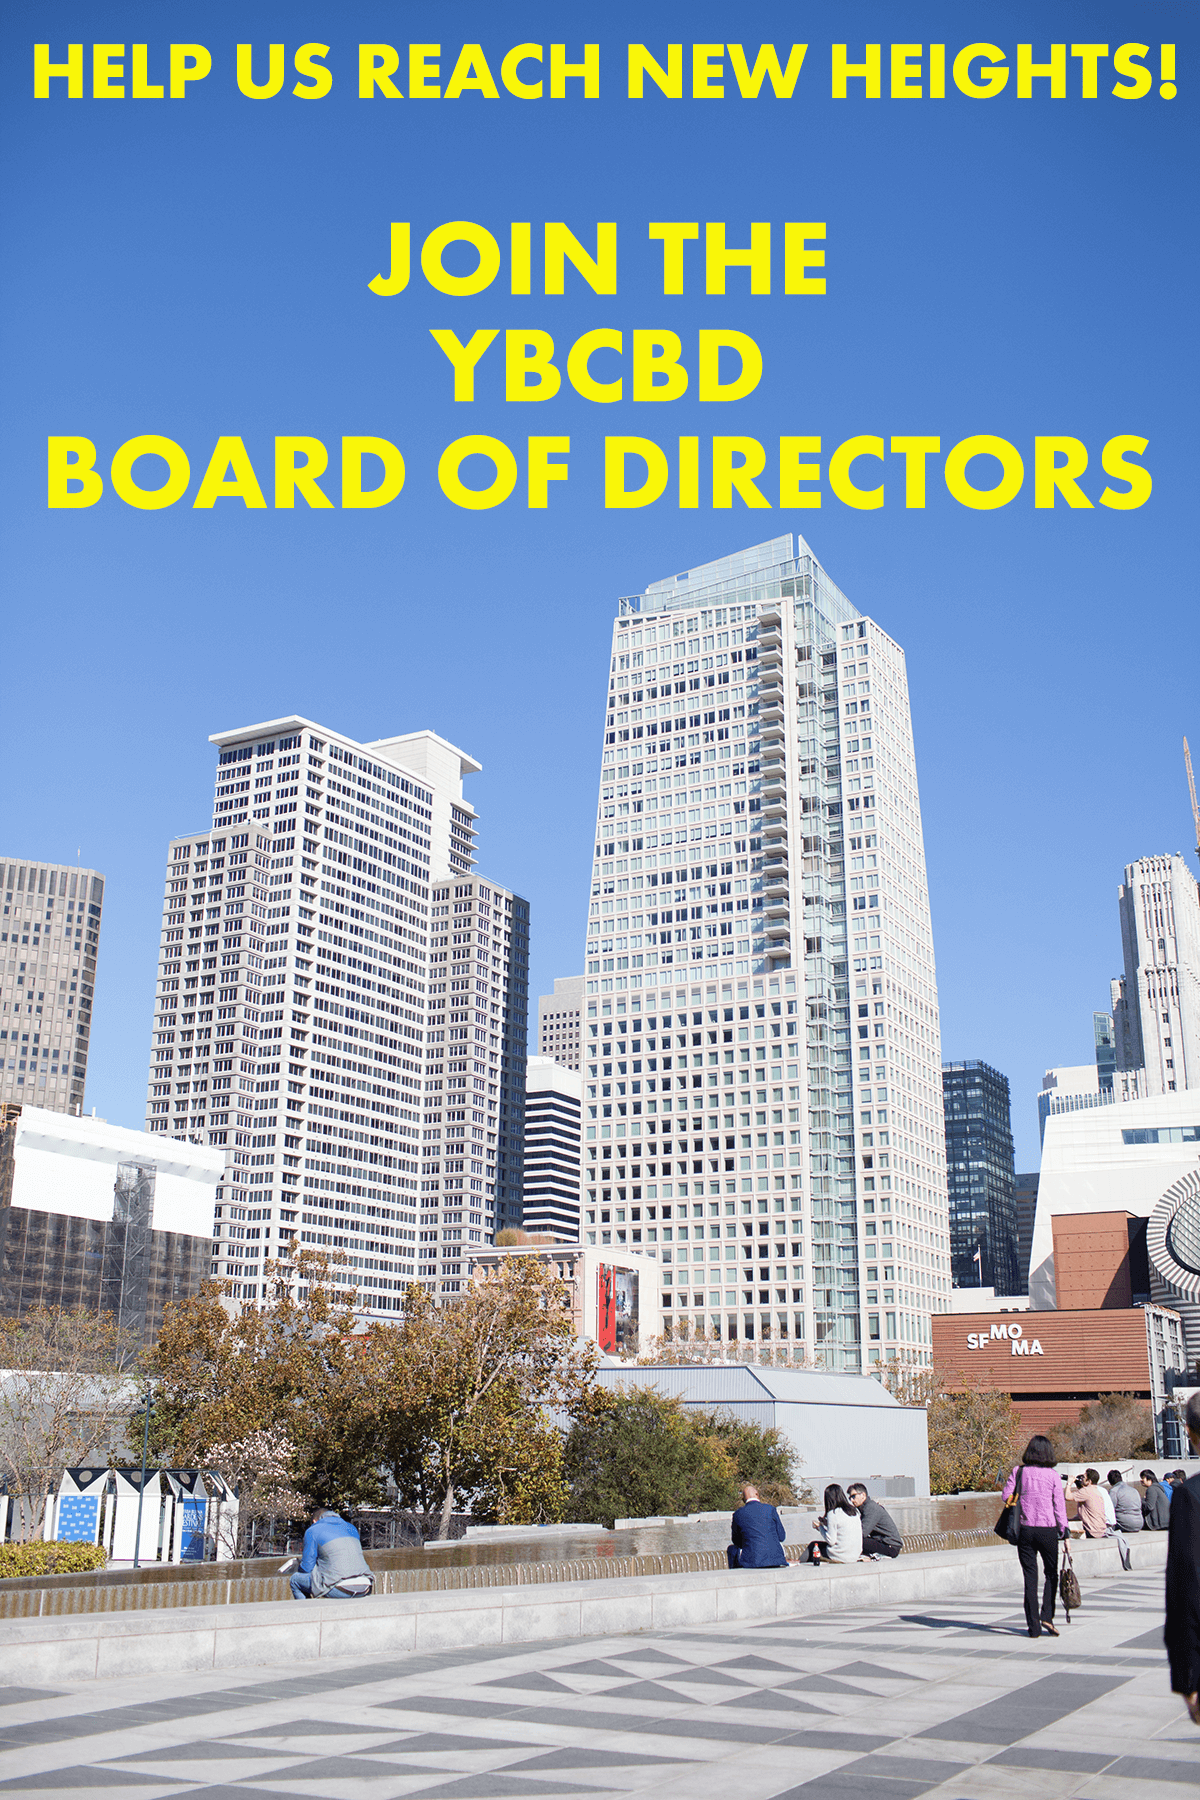 Join the YBCBD and make a difference!